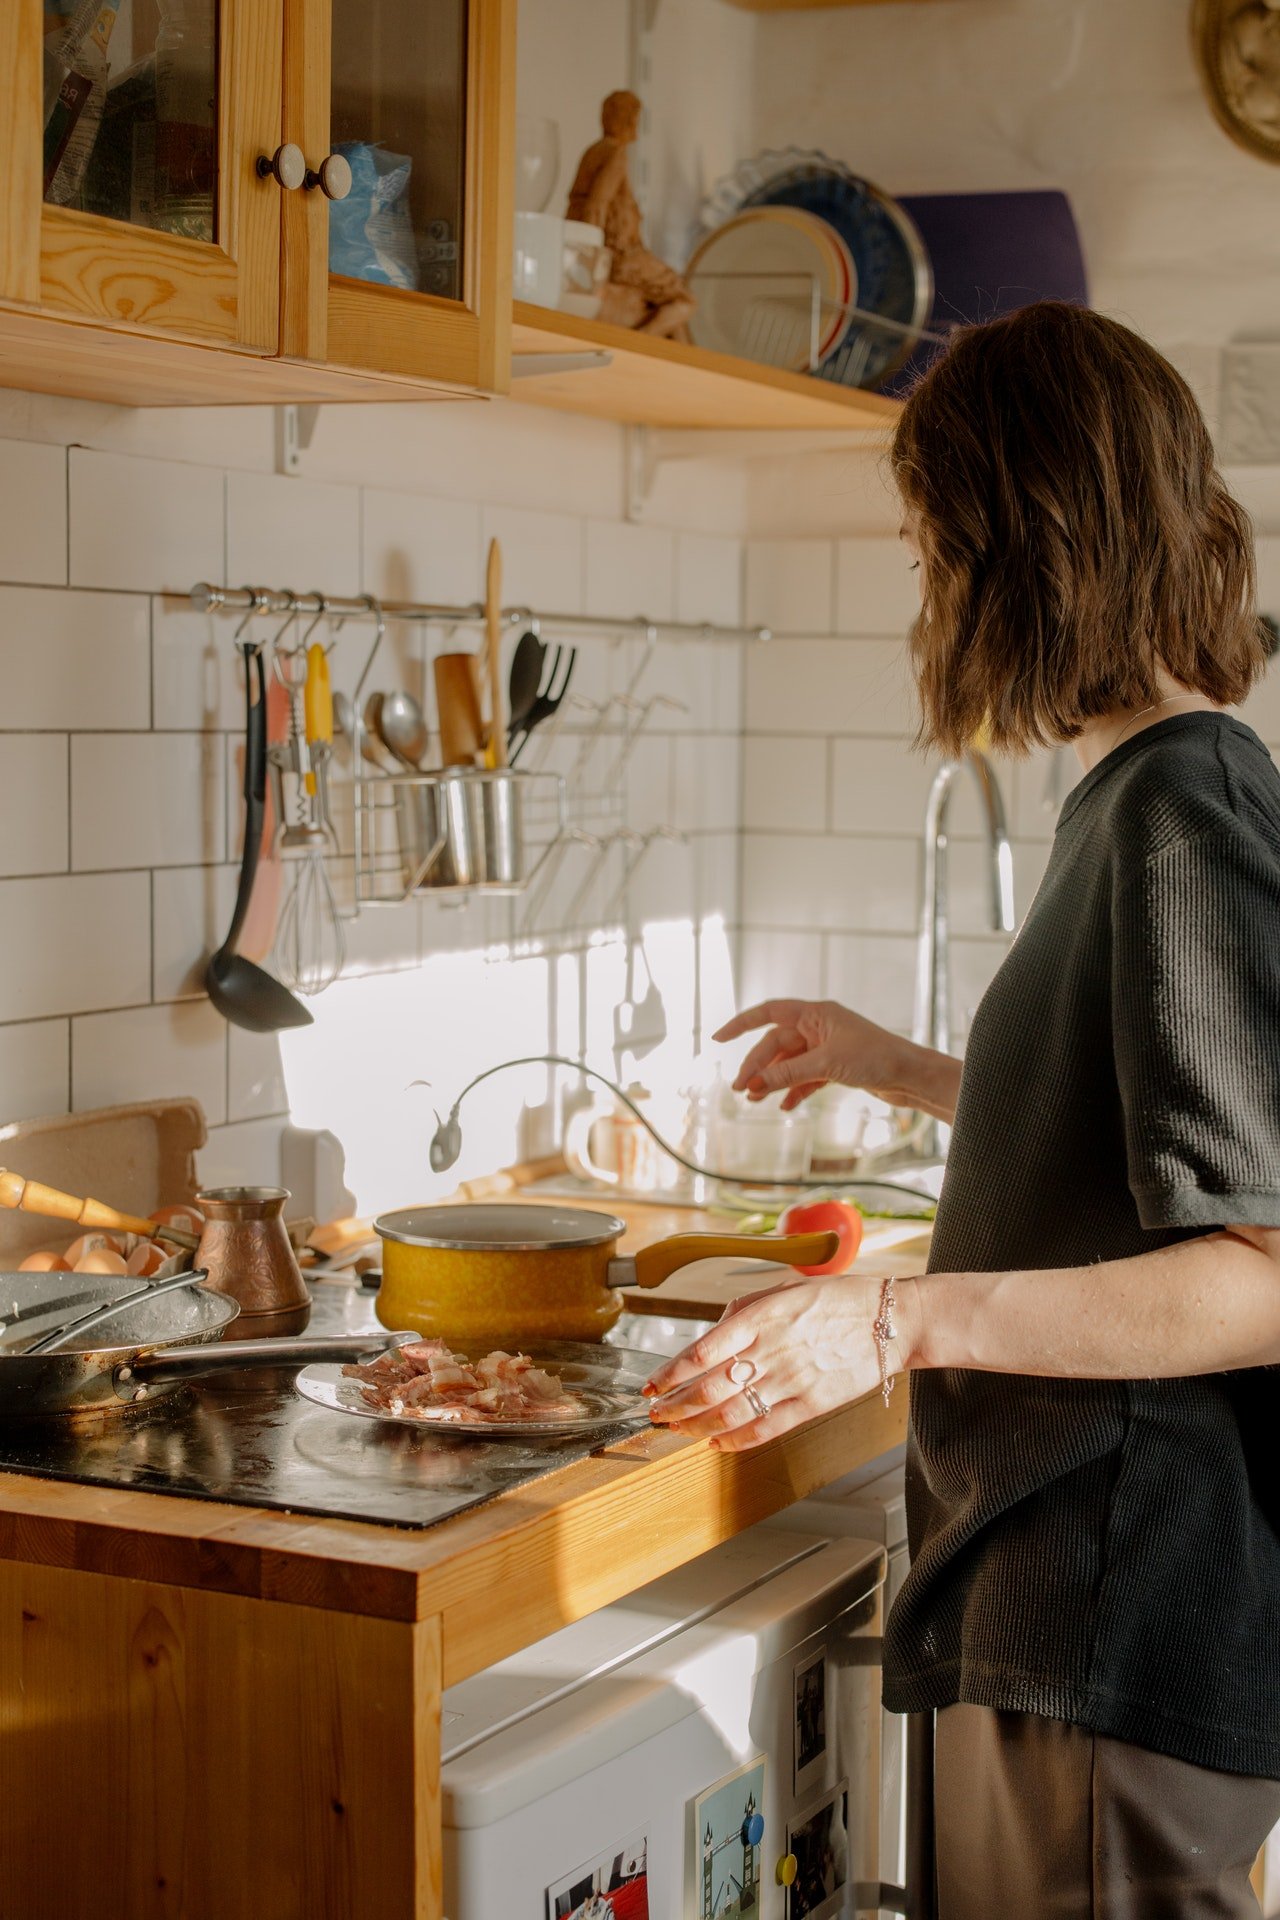 She was chatting with Amanda in the kitchen and heard Juan's voice. | Source: Pexels